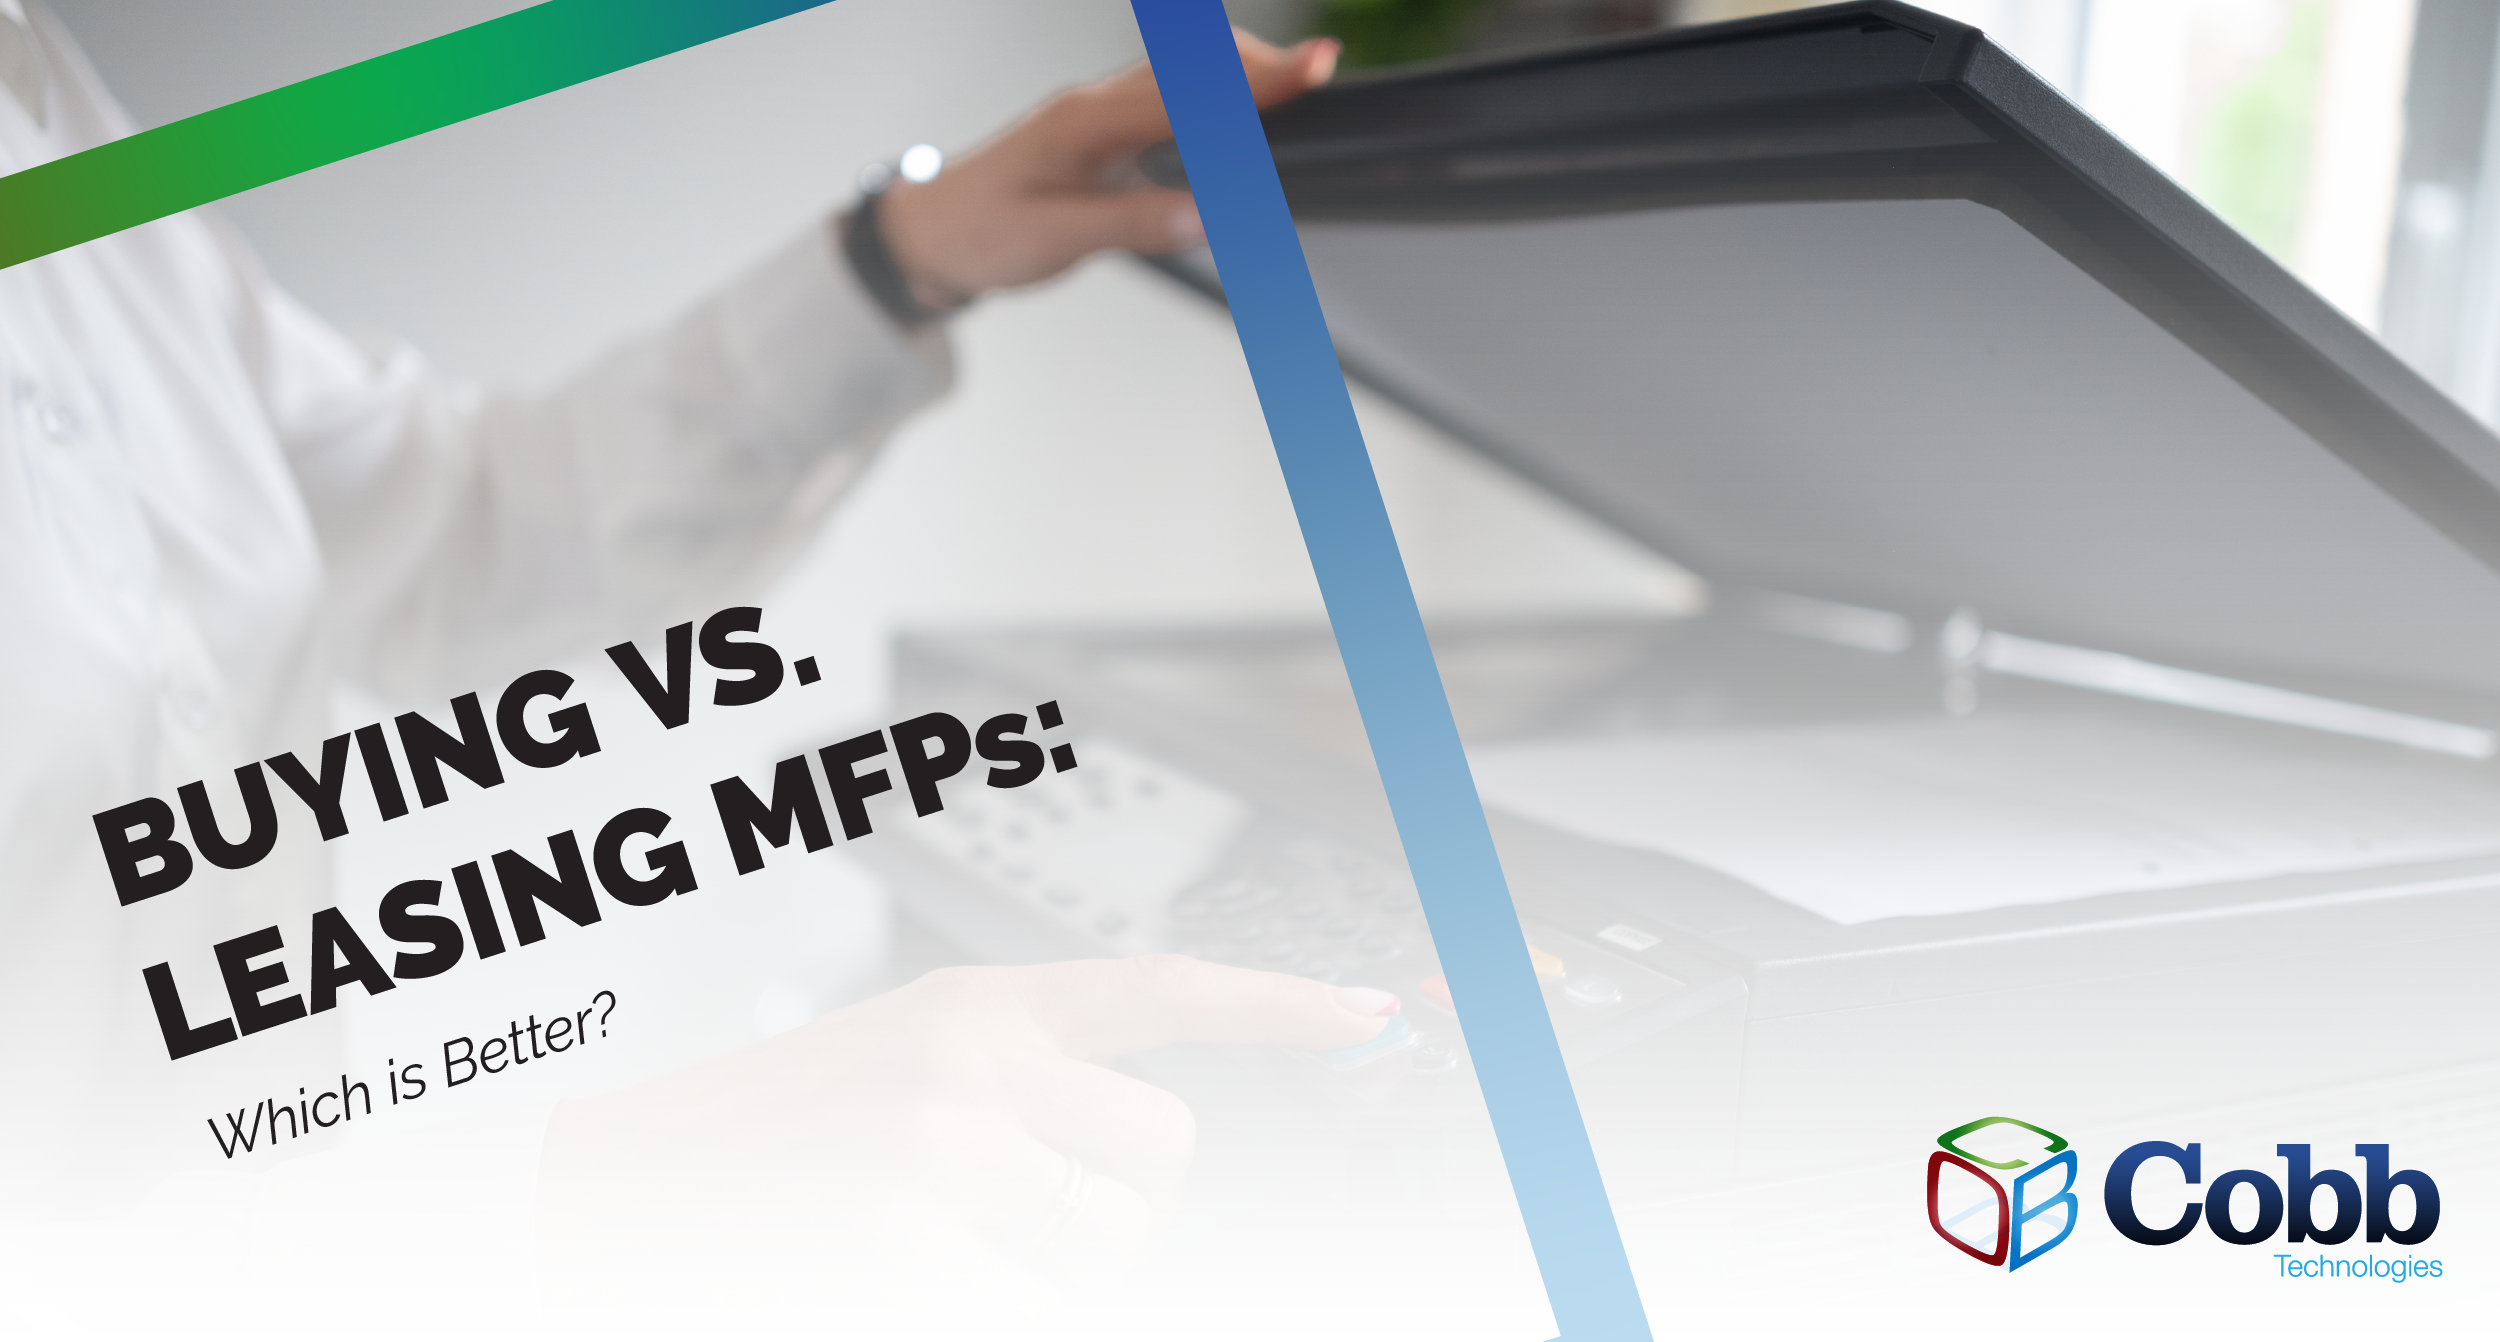 Buying vs. Leasing Multi-Function Printers - Which is better?